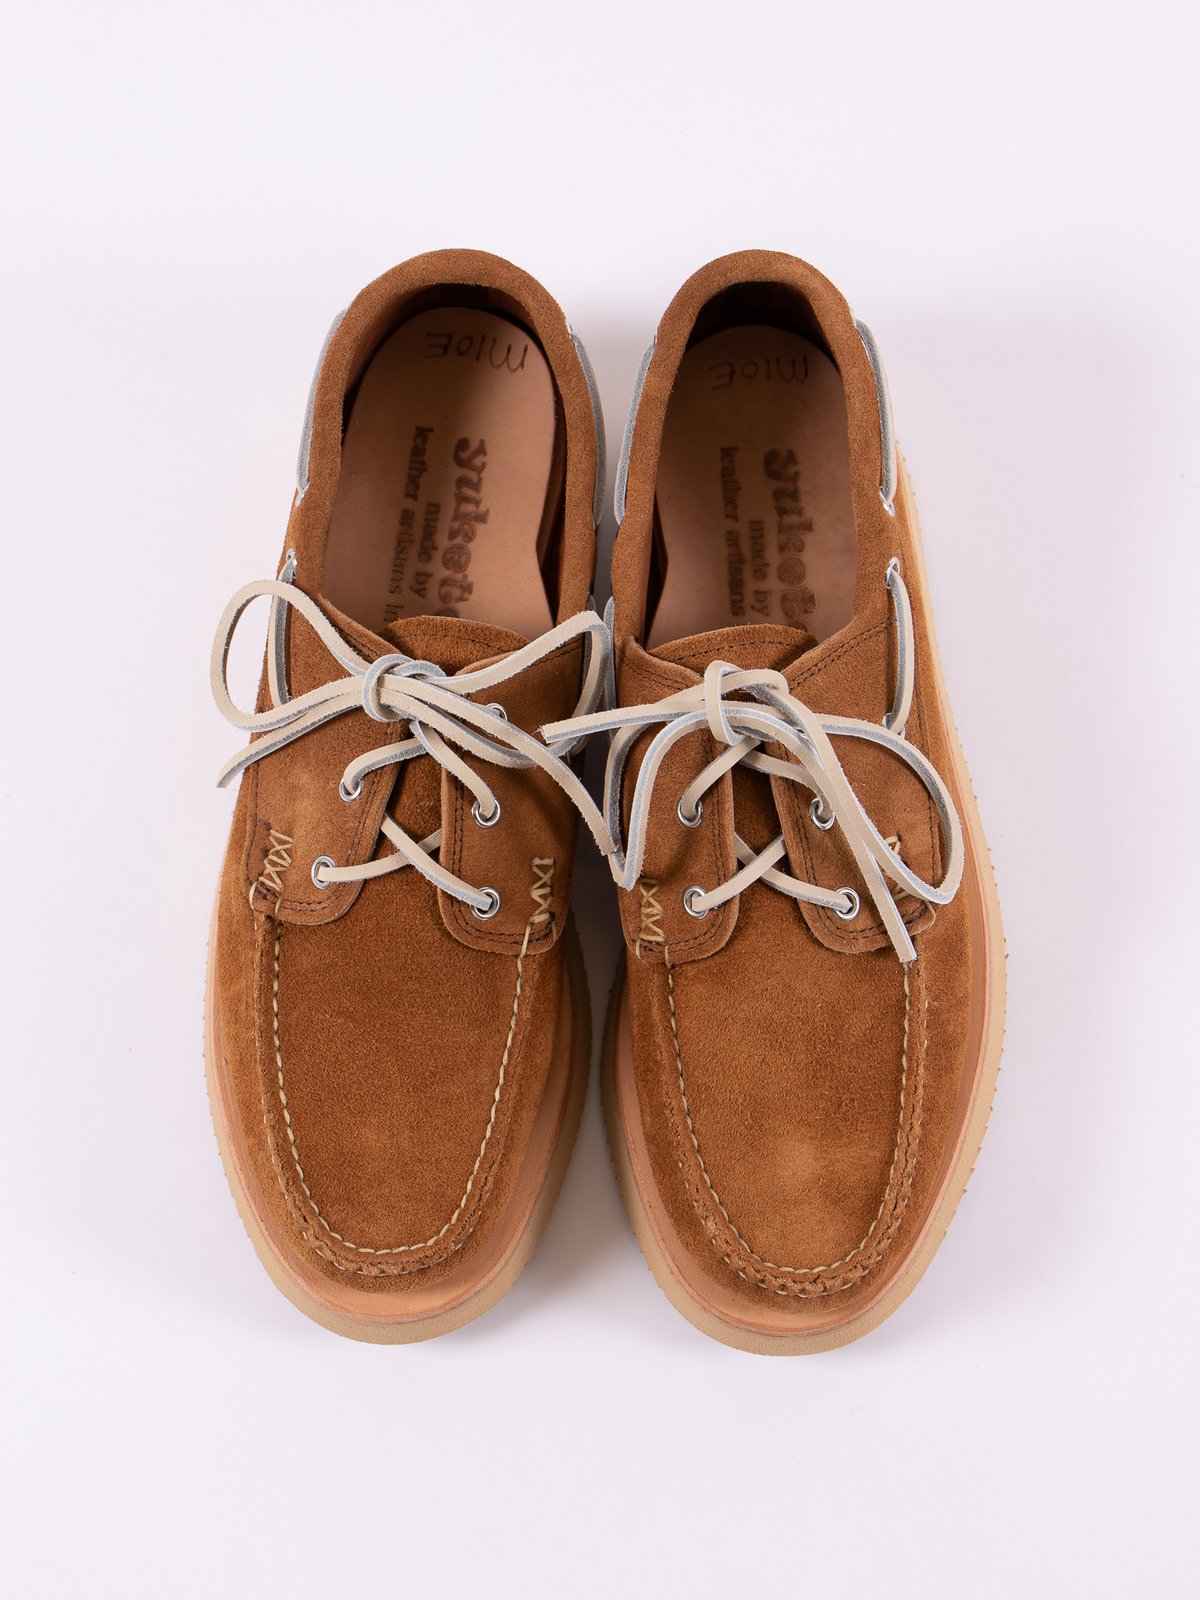 FO Golden Brown Boat Shoe Exclusive - Image 6